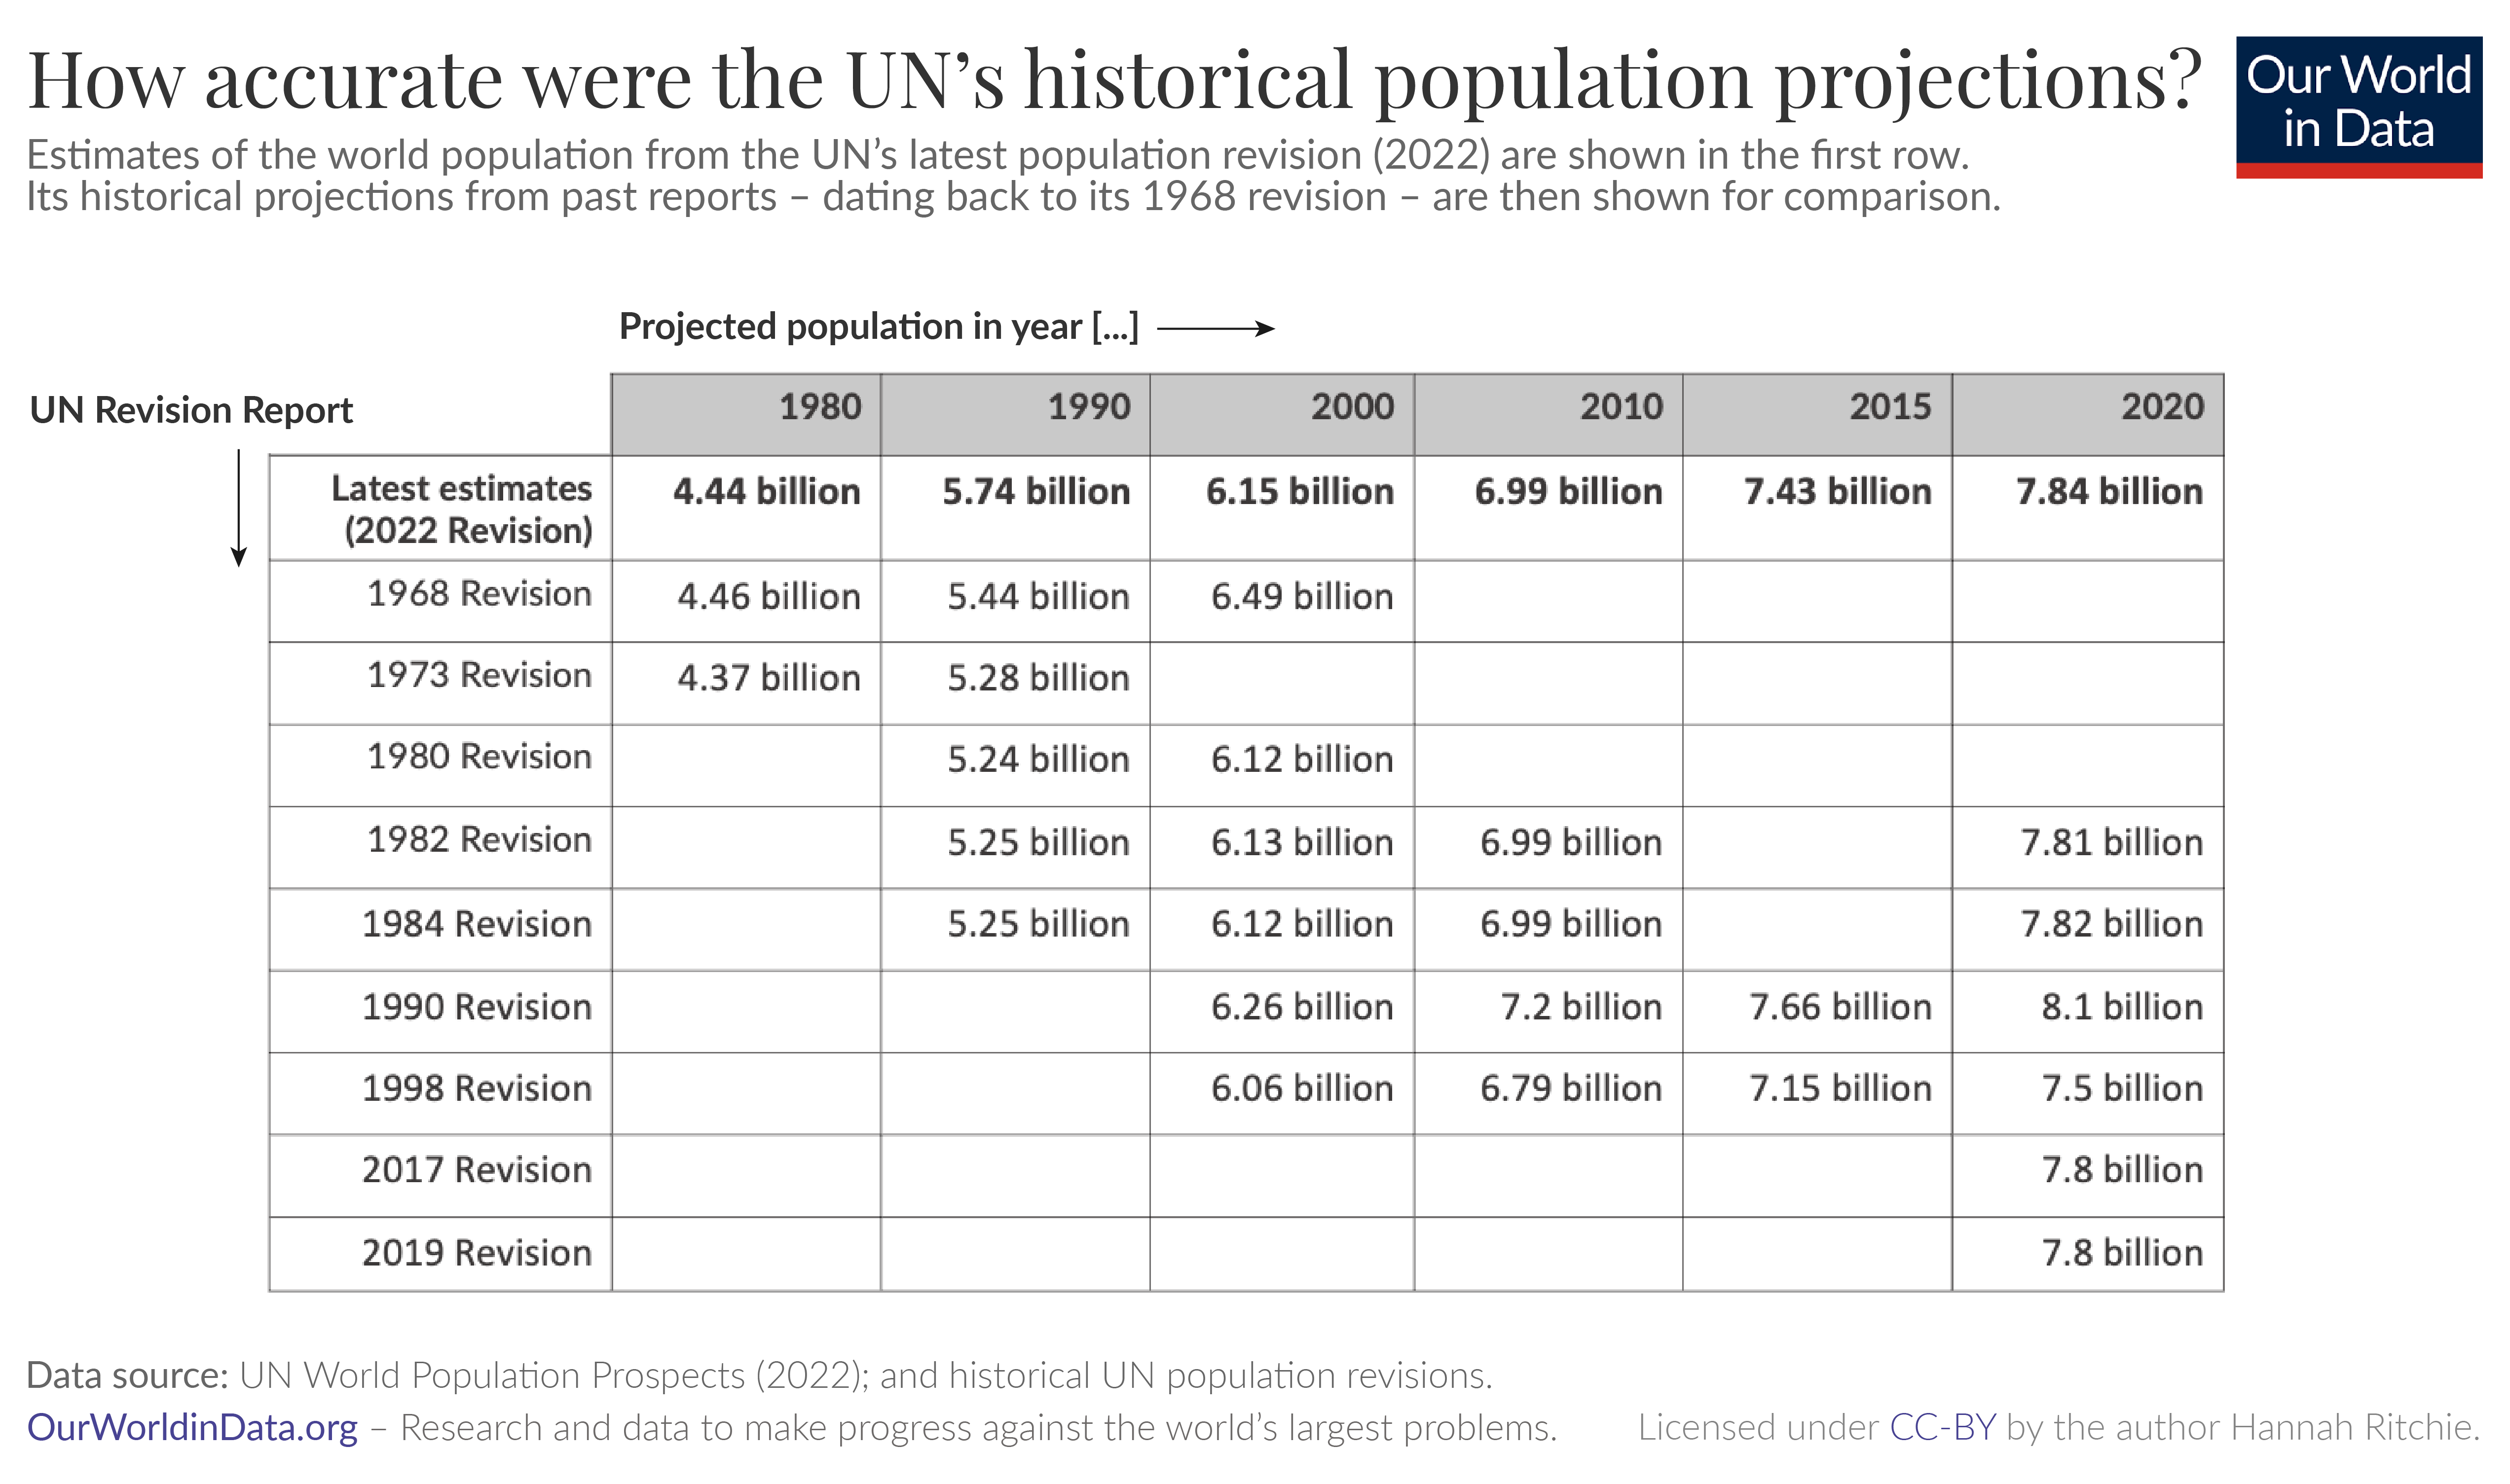 Table of UN population projections over time, compared to the real estimates of the world population. Most projections were a close match to reality.